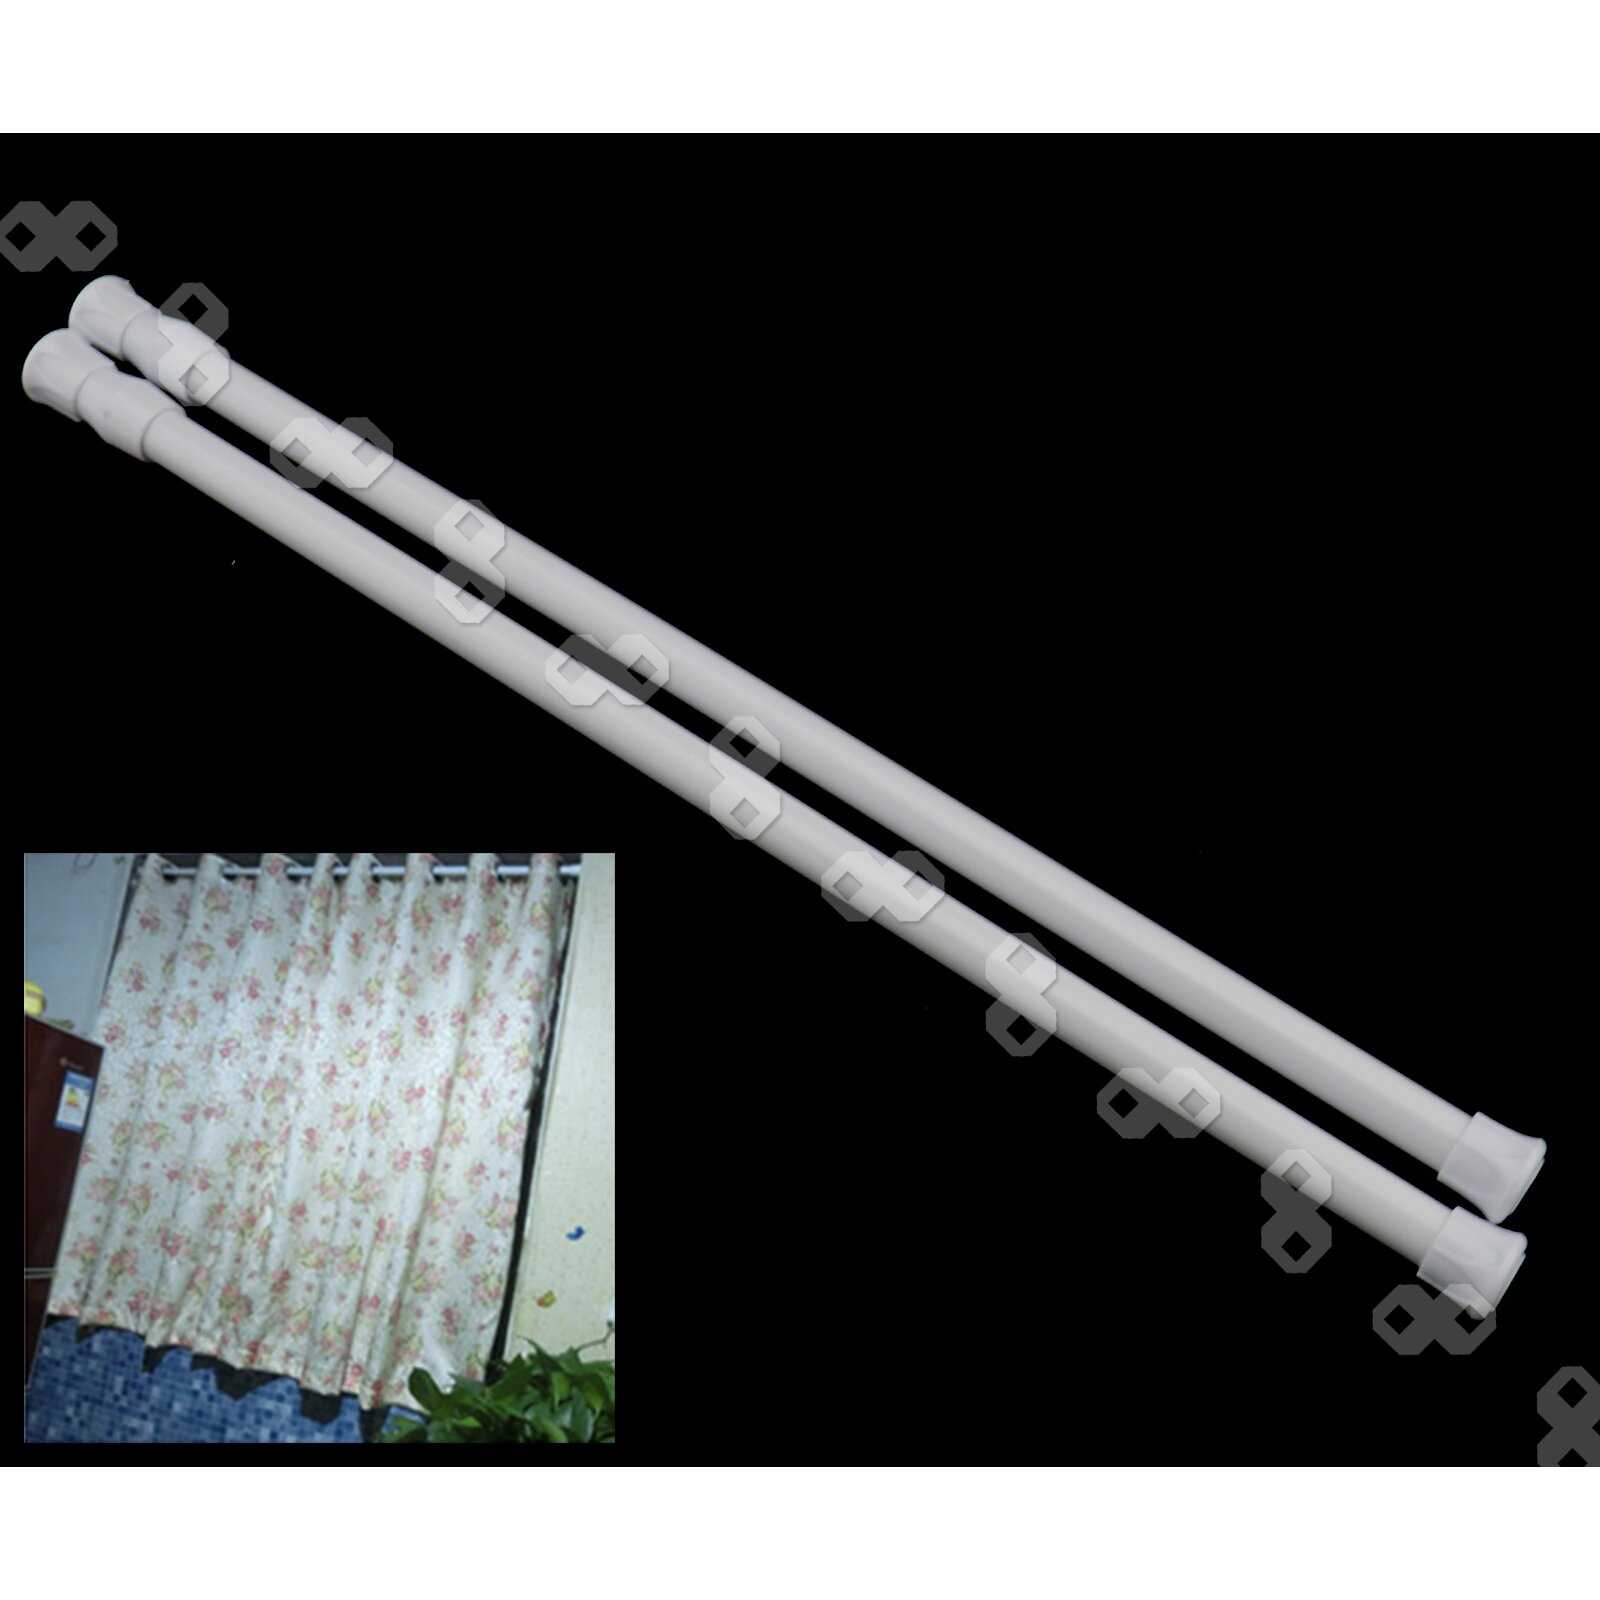 40-70cm Spring Loaded Extendable Rods Voile Net Curtain Tension Rod Pole Rail